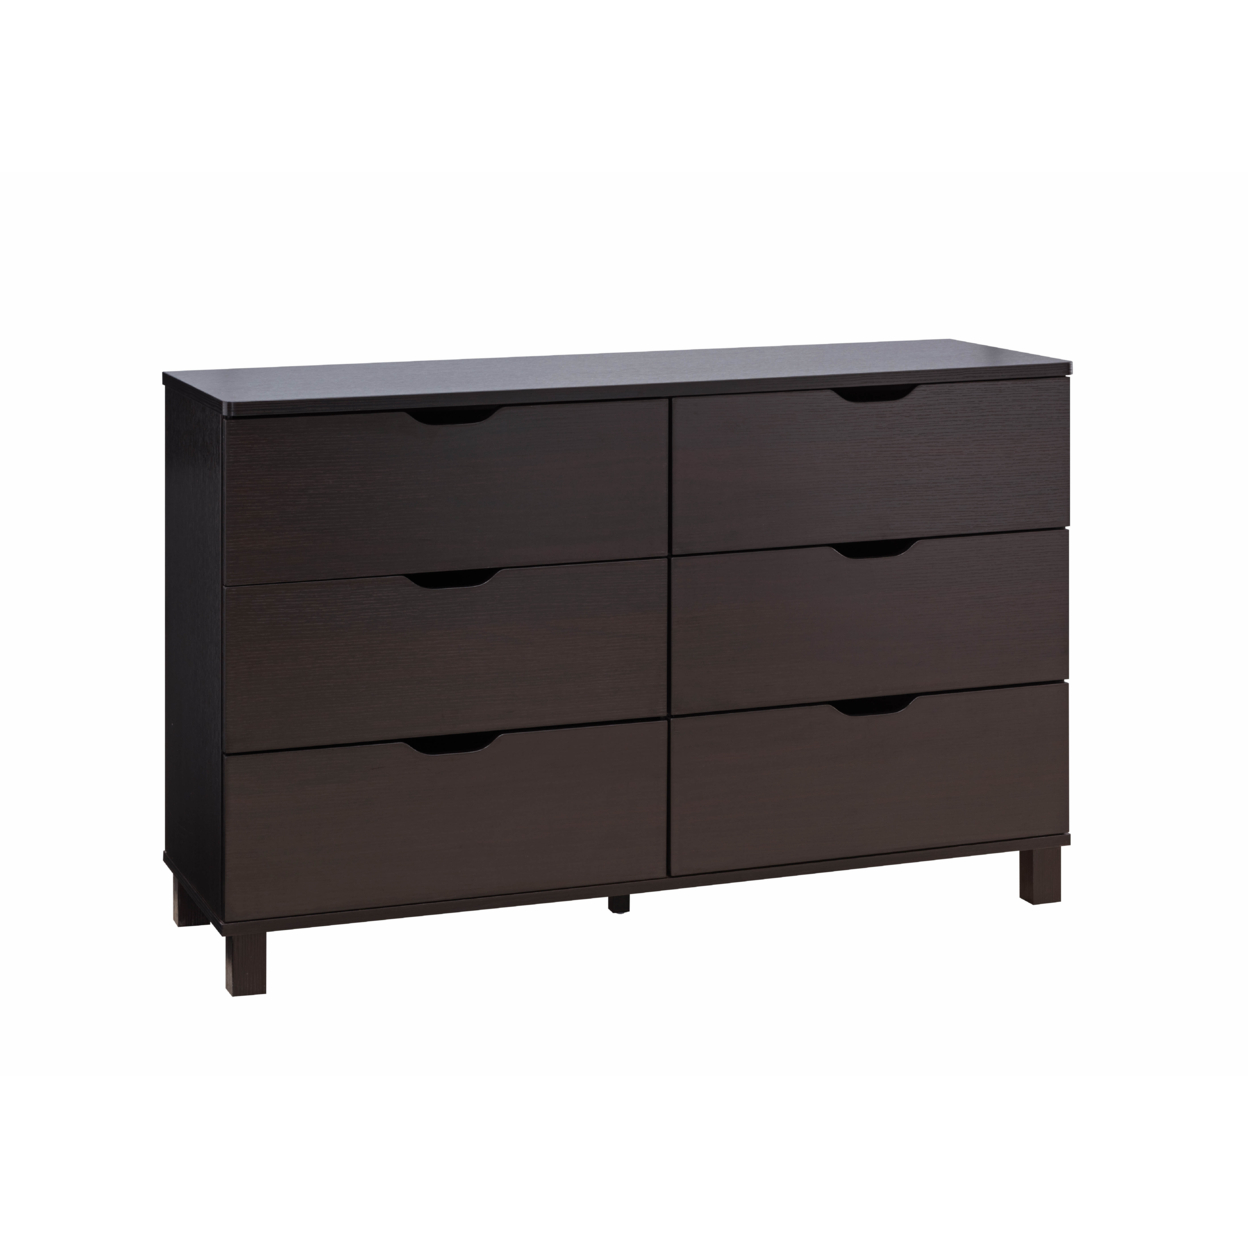 Dresser With 6 Drawers And Cut Out Pulls, Dark Brown - Saltoro Sherpi